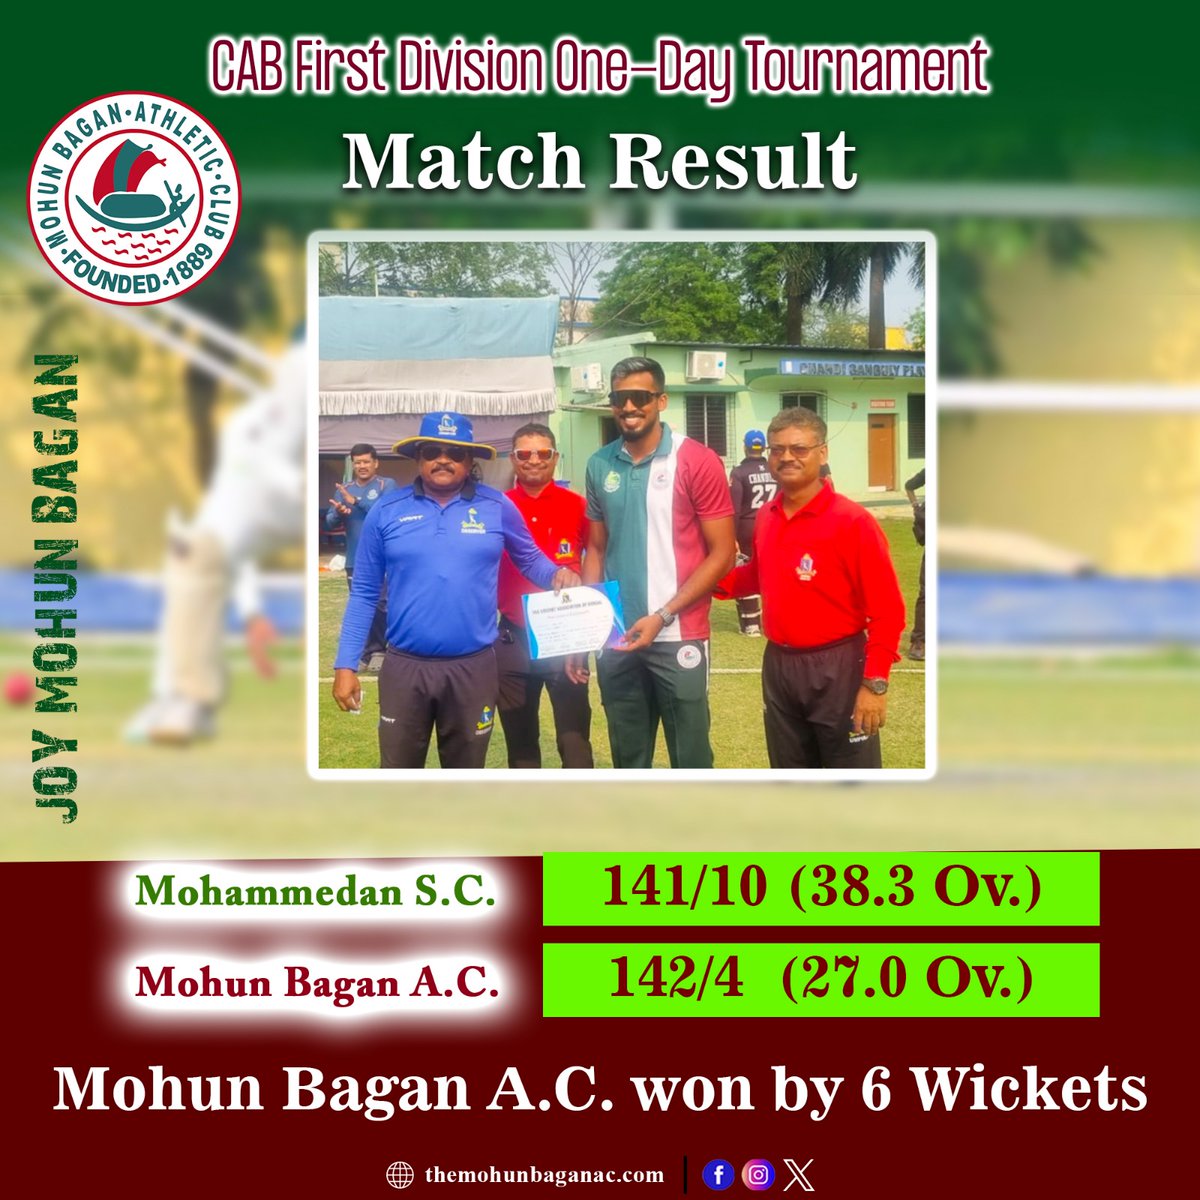 Mohun Bagan's emphatic victory, cruising to a 6-wicket win over Mohammedan Sporting Club, showcased their dominance as we chased down 142 runs in just 27 overs. #JoyMohunBagan #Mariners #MohunBagan #MBAC #MohunBaganCricket #MohunBaganCricketTeam #CAB #CricketAssociationofBengal